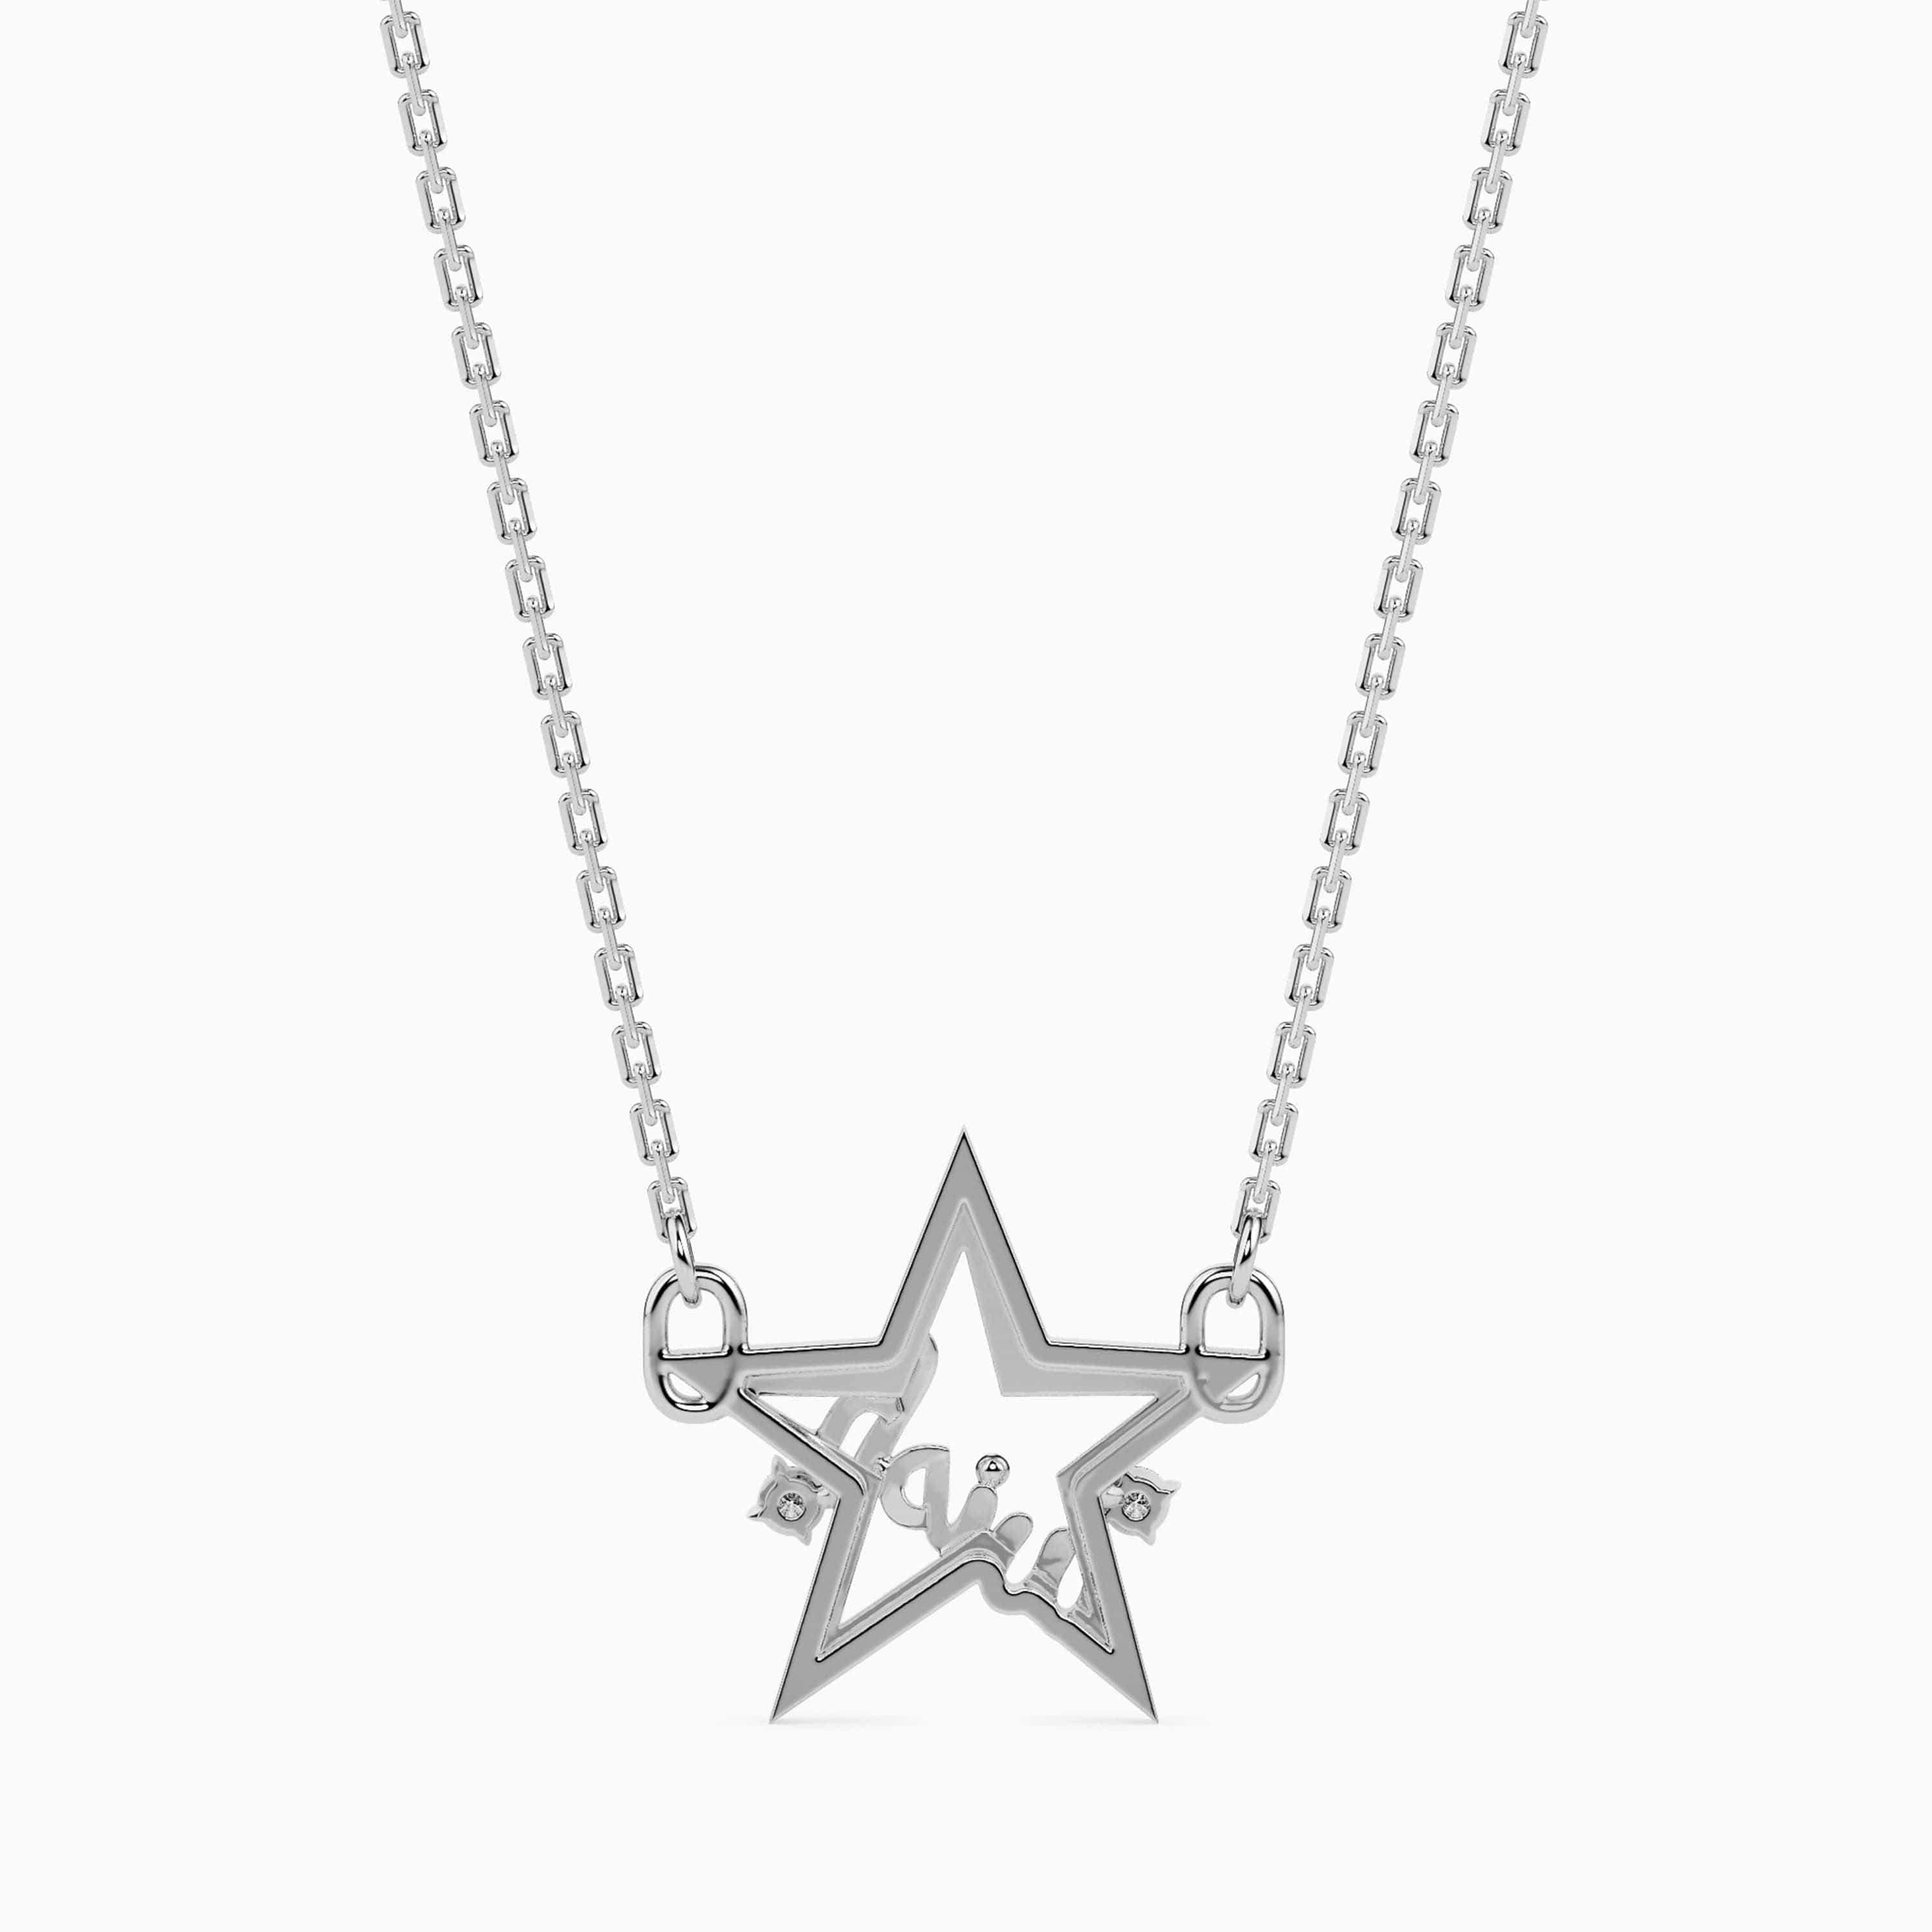 Champagne Diamond Star Necklace | Meira T necklace at freedman jeweler -  Freedman Jewelers